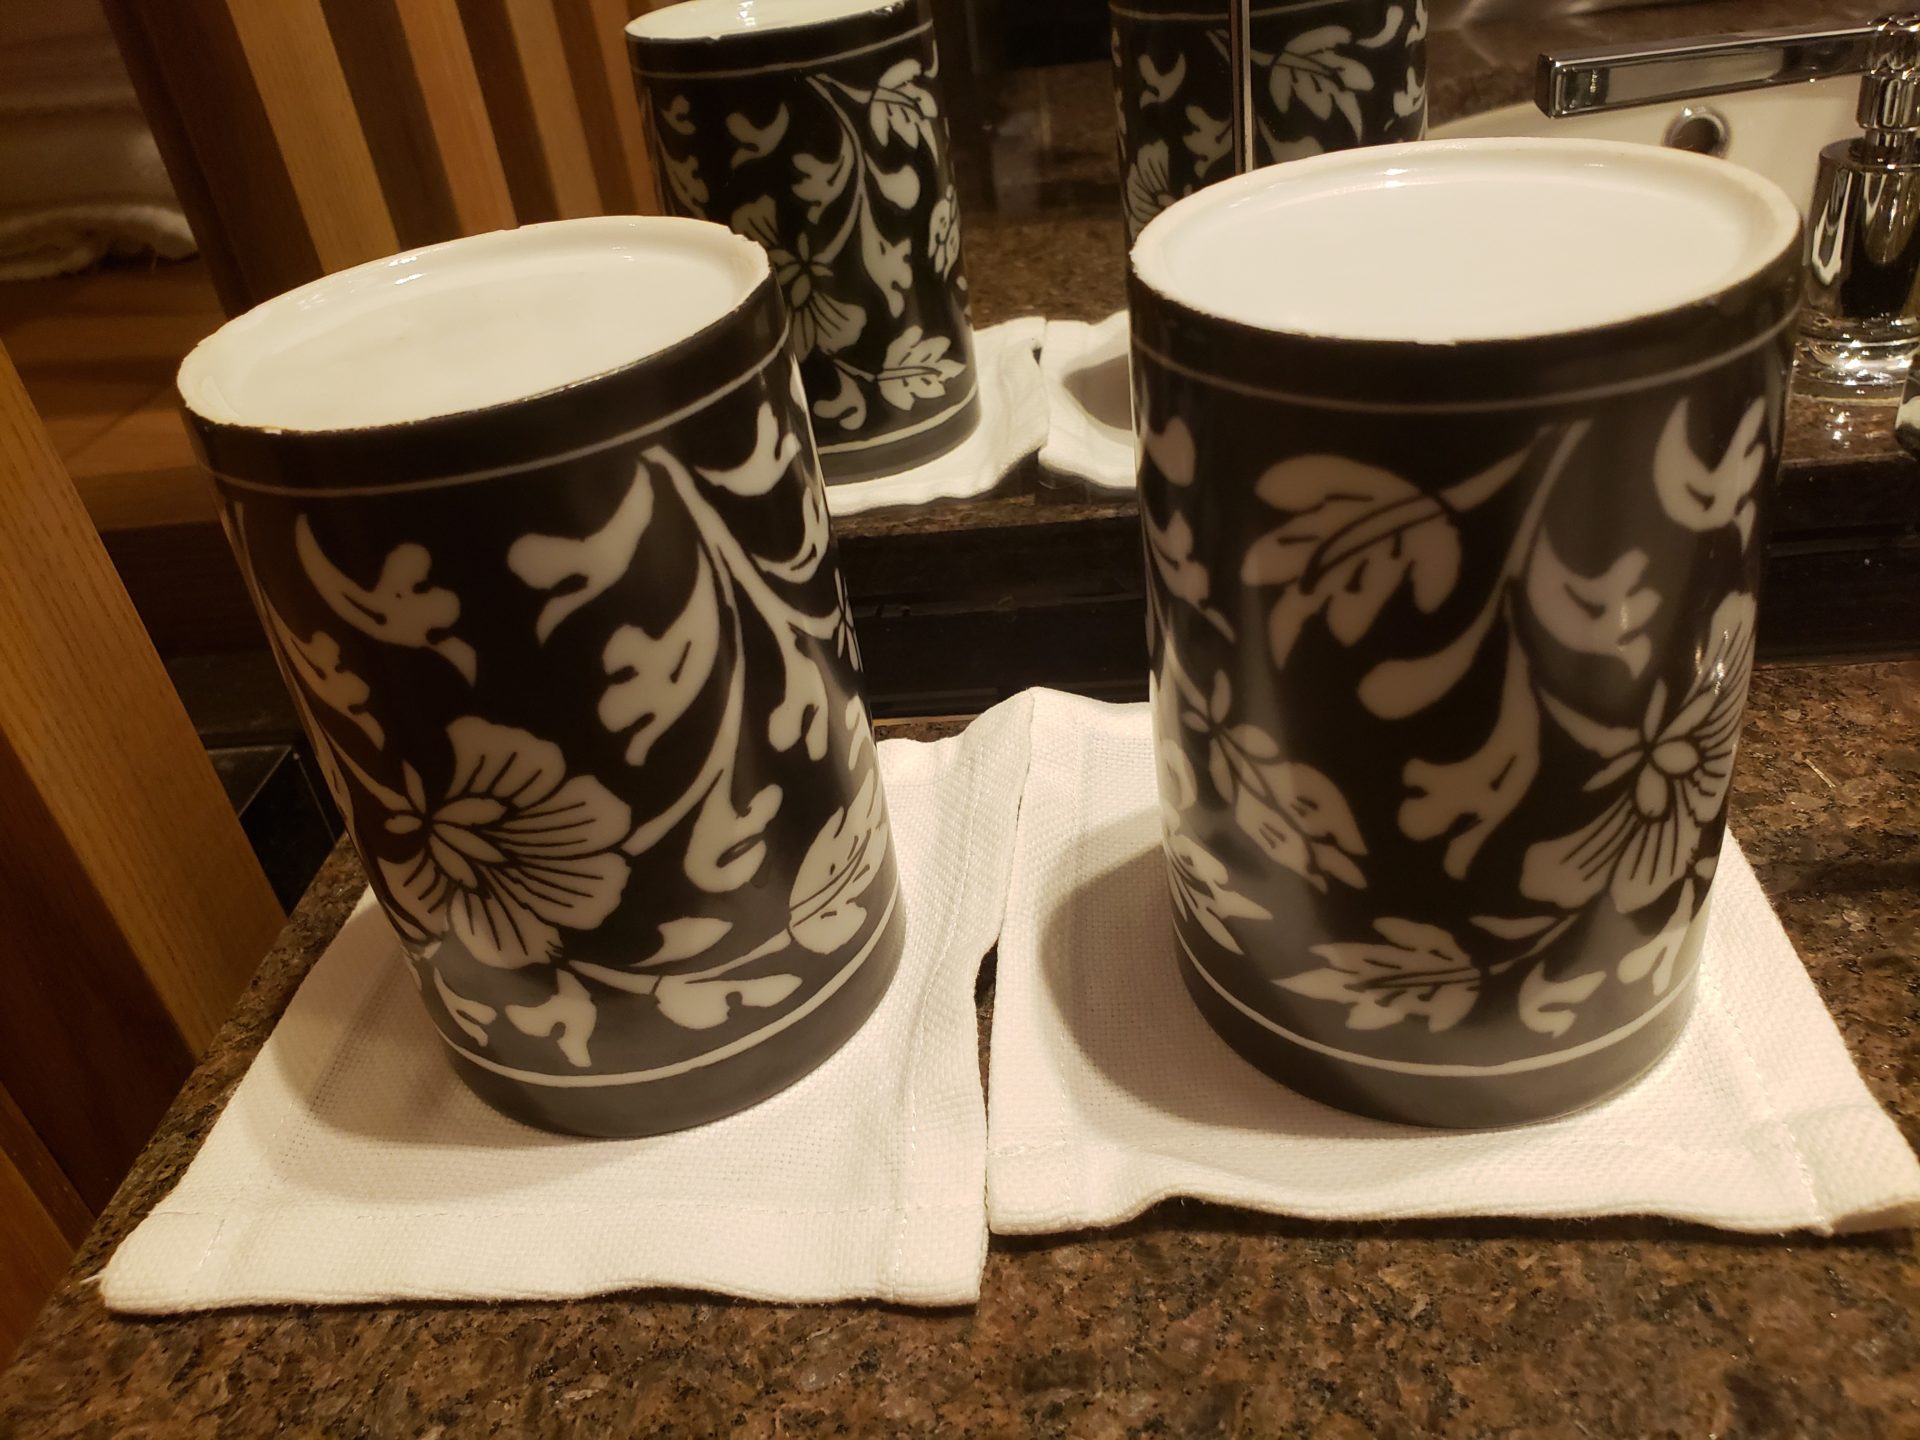 a group of black and white mugs on a napkin